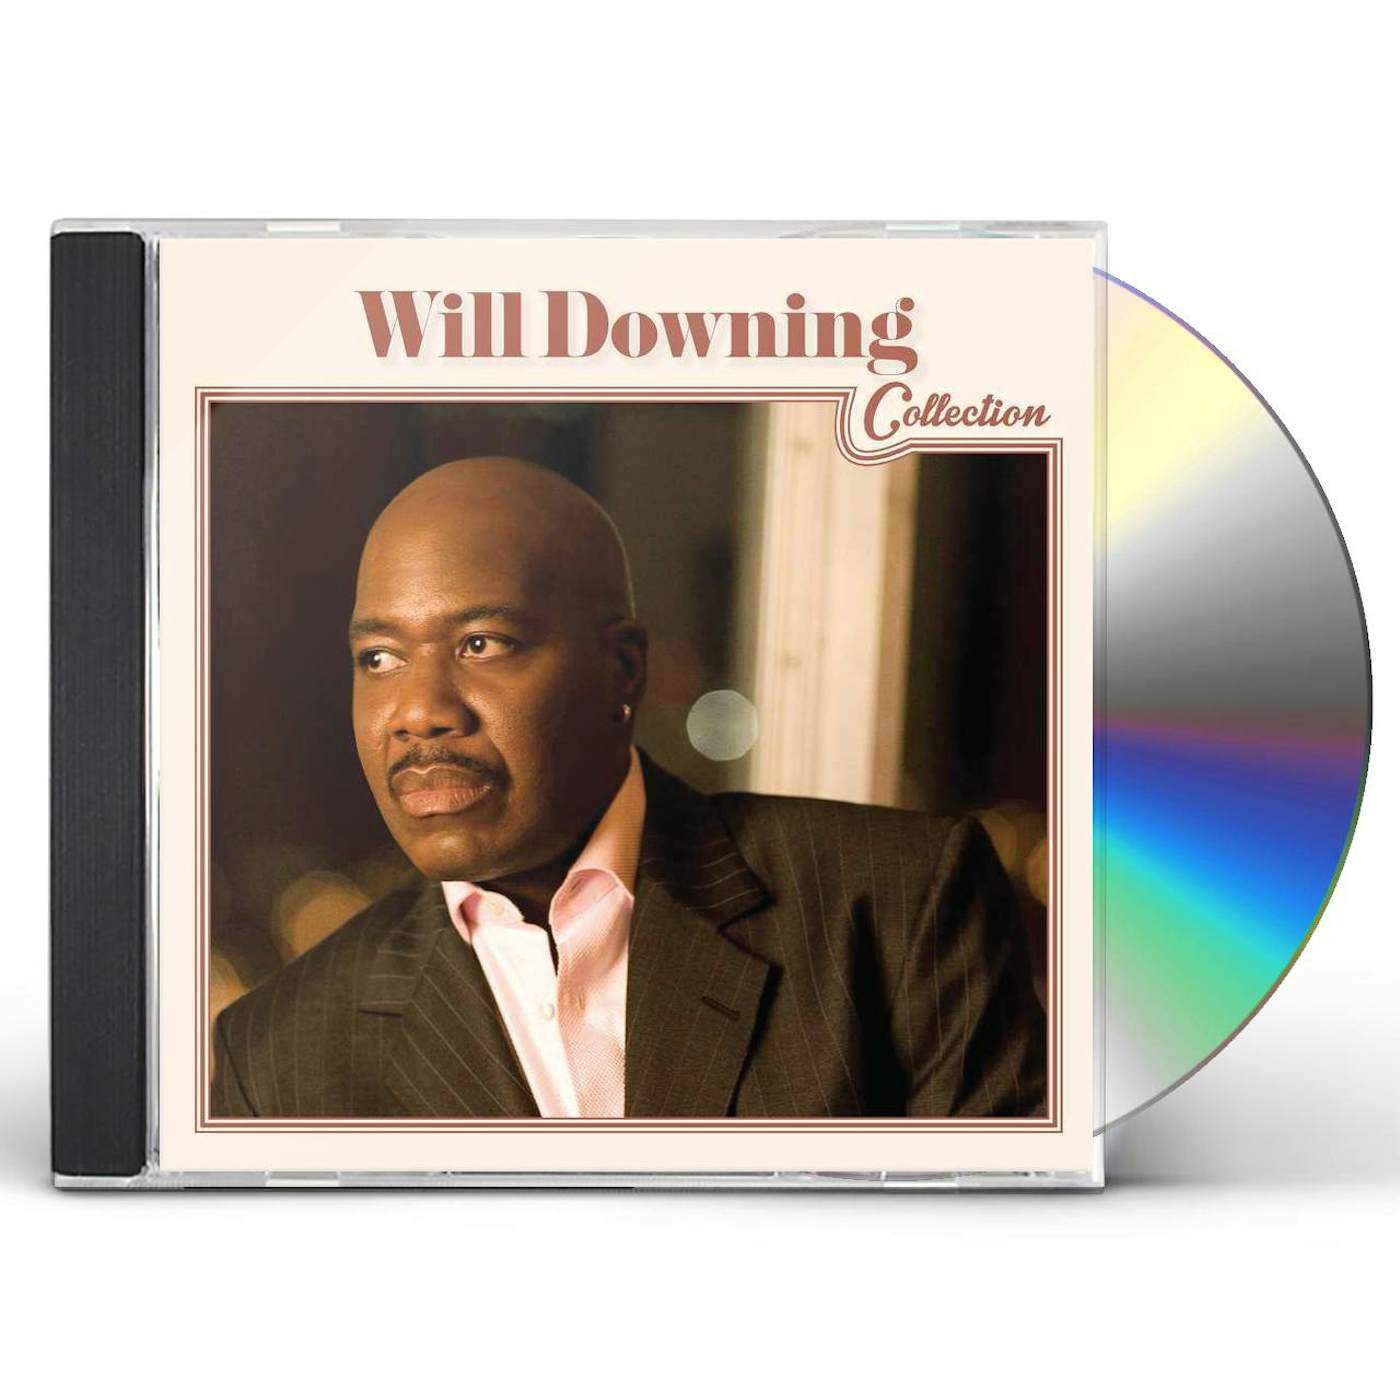 WILL DOWNING COLLECTION CD